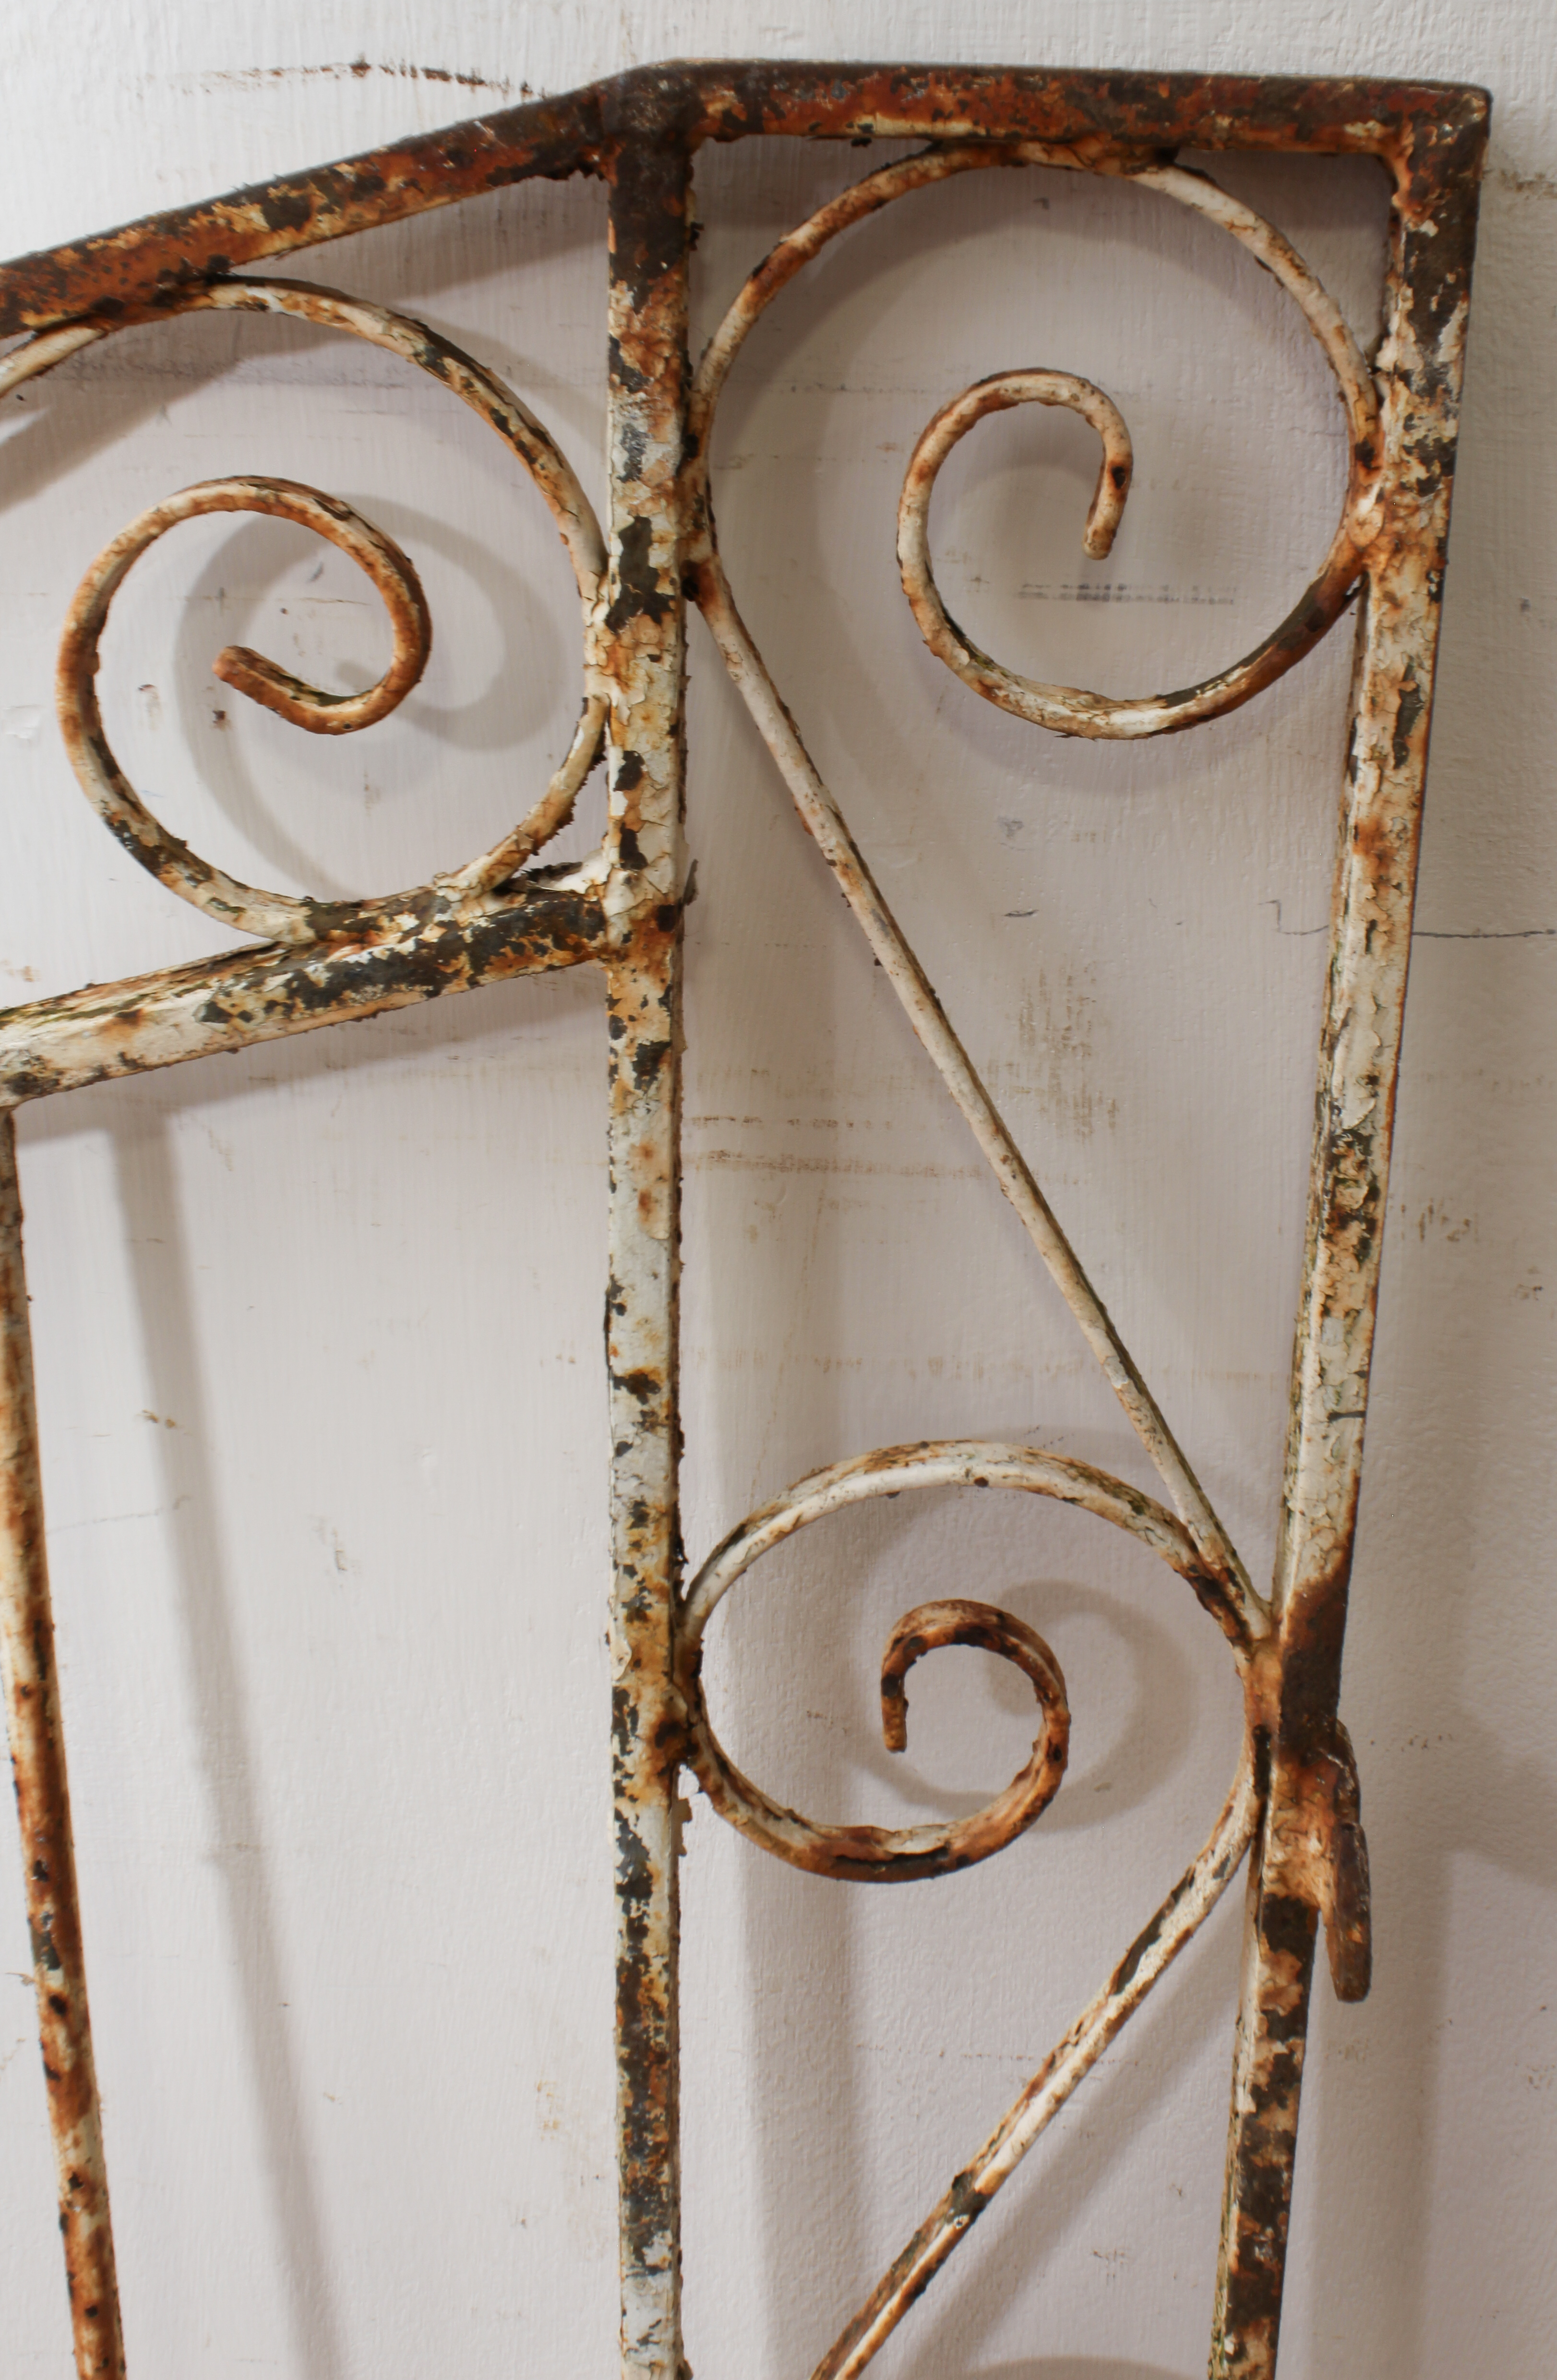 A set of wrought iron driveway gates (271 x 92 cm) - Image 4 of 7